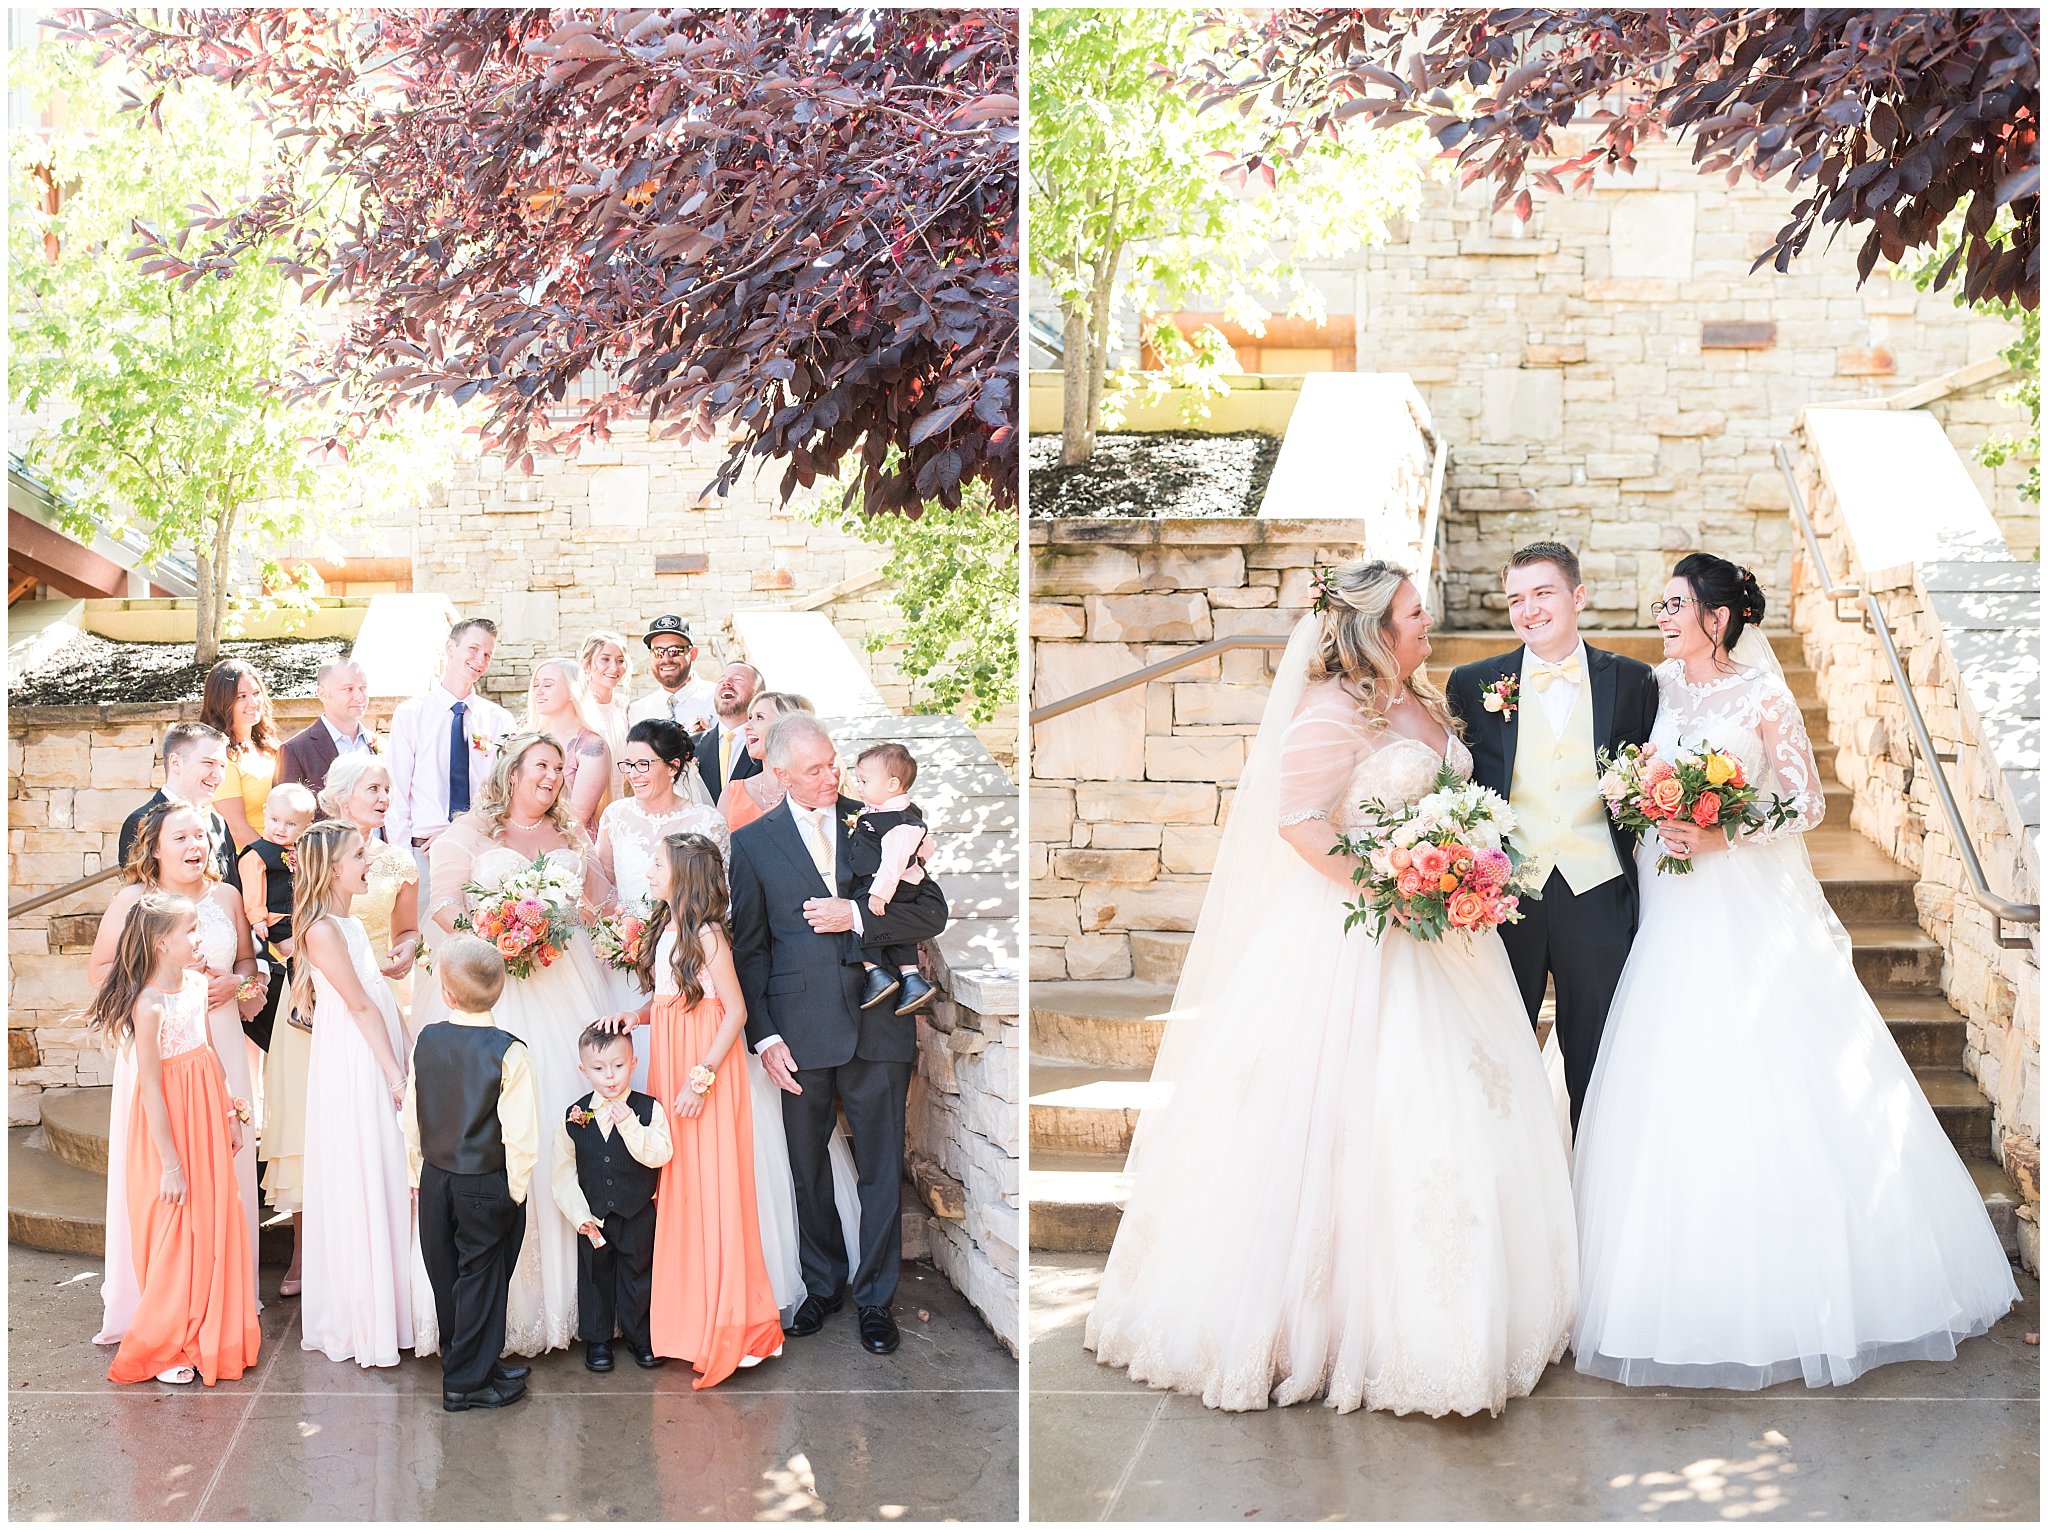 Wedding day family portraits during butterfly wedding with sunset colors | Park City Wedding at the Hyatt Centric | Jessie and Dallin Photography